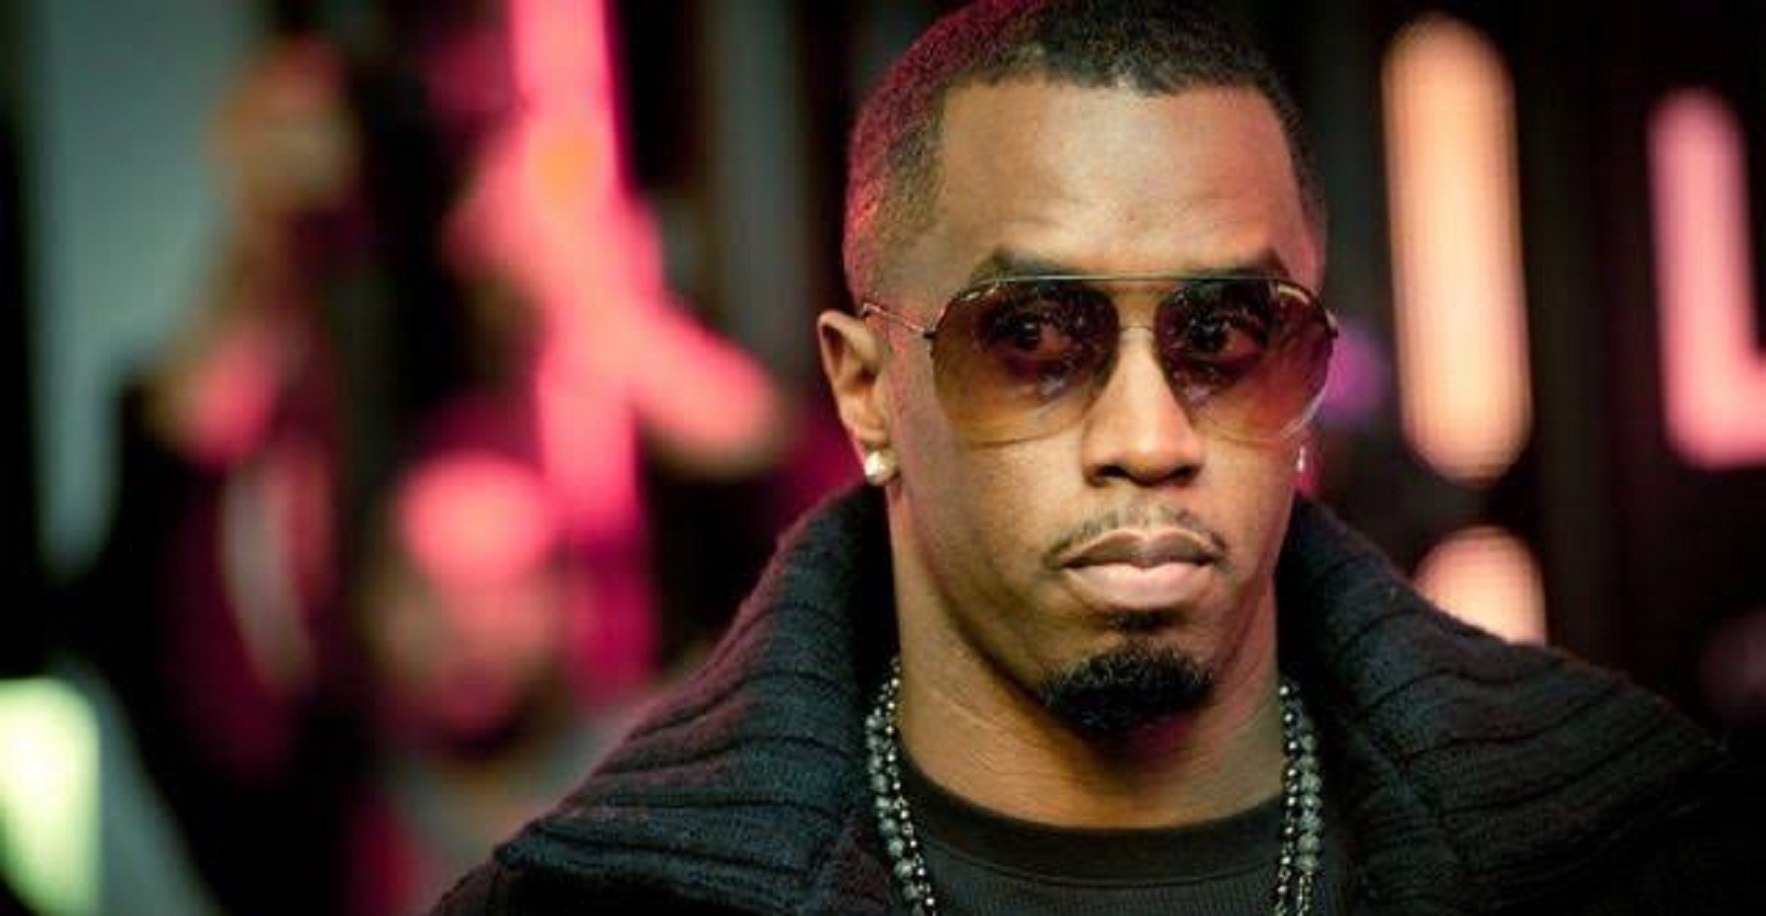 P. Diddy To Be Honored With ‘Icon Award’ at Pre-Grammy Gala